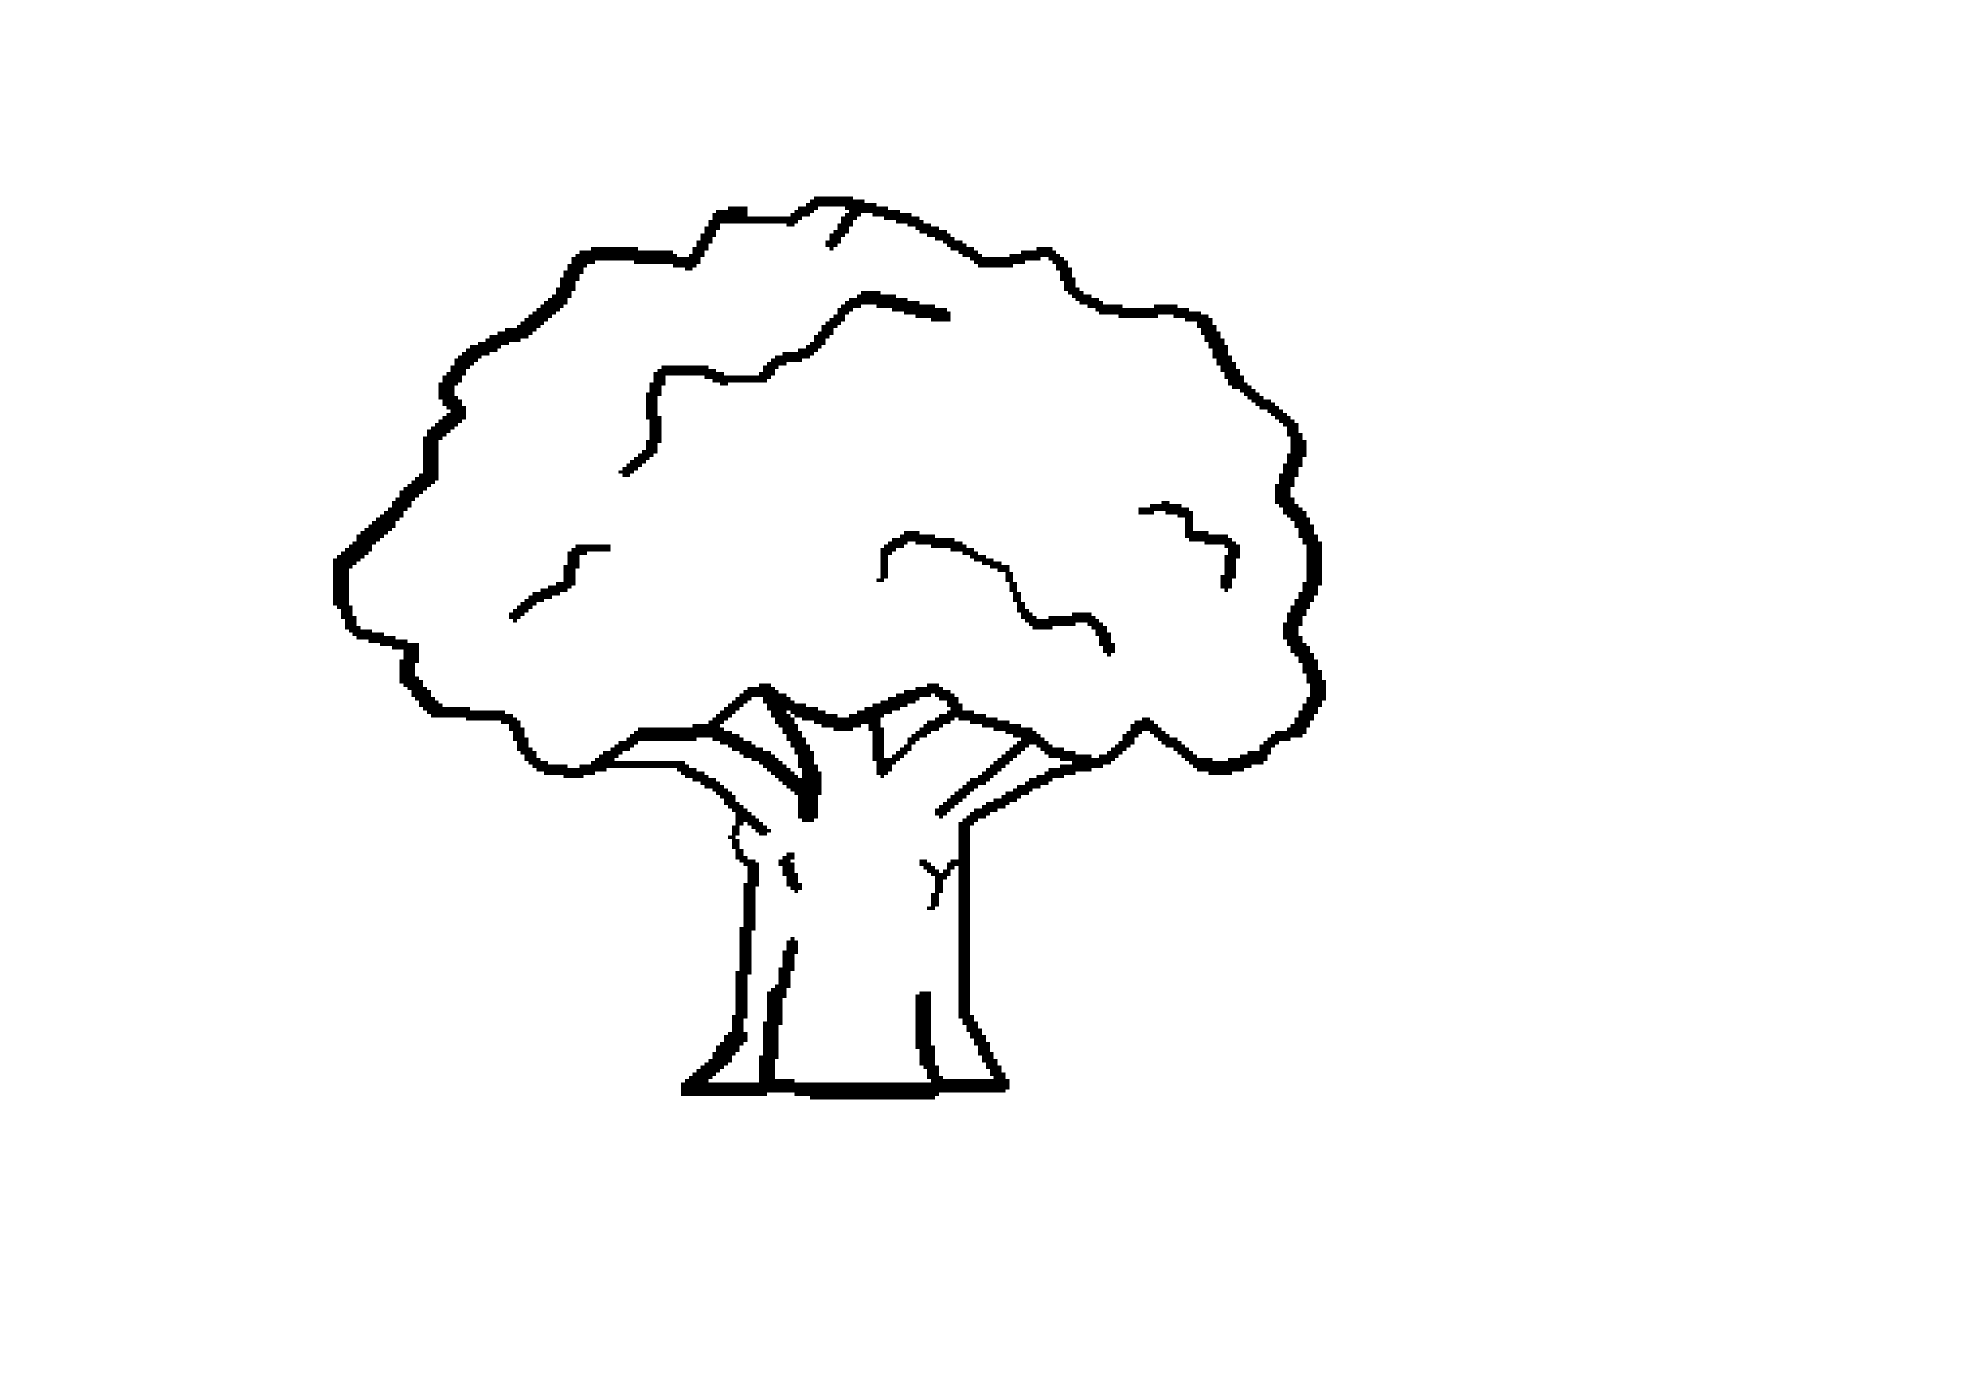 Tree  black and white tree clipart black and white 2